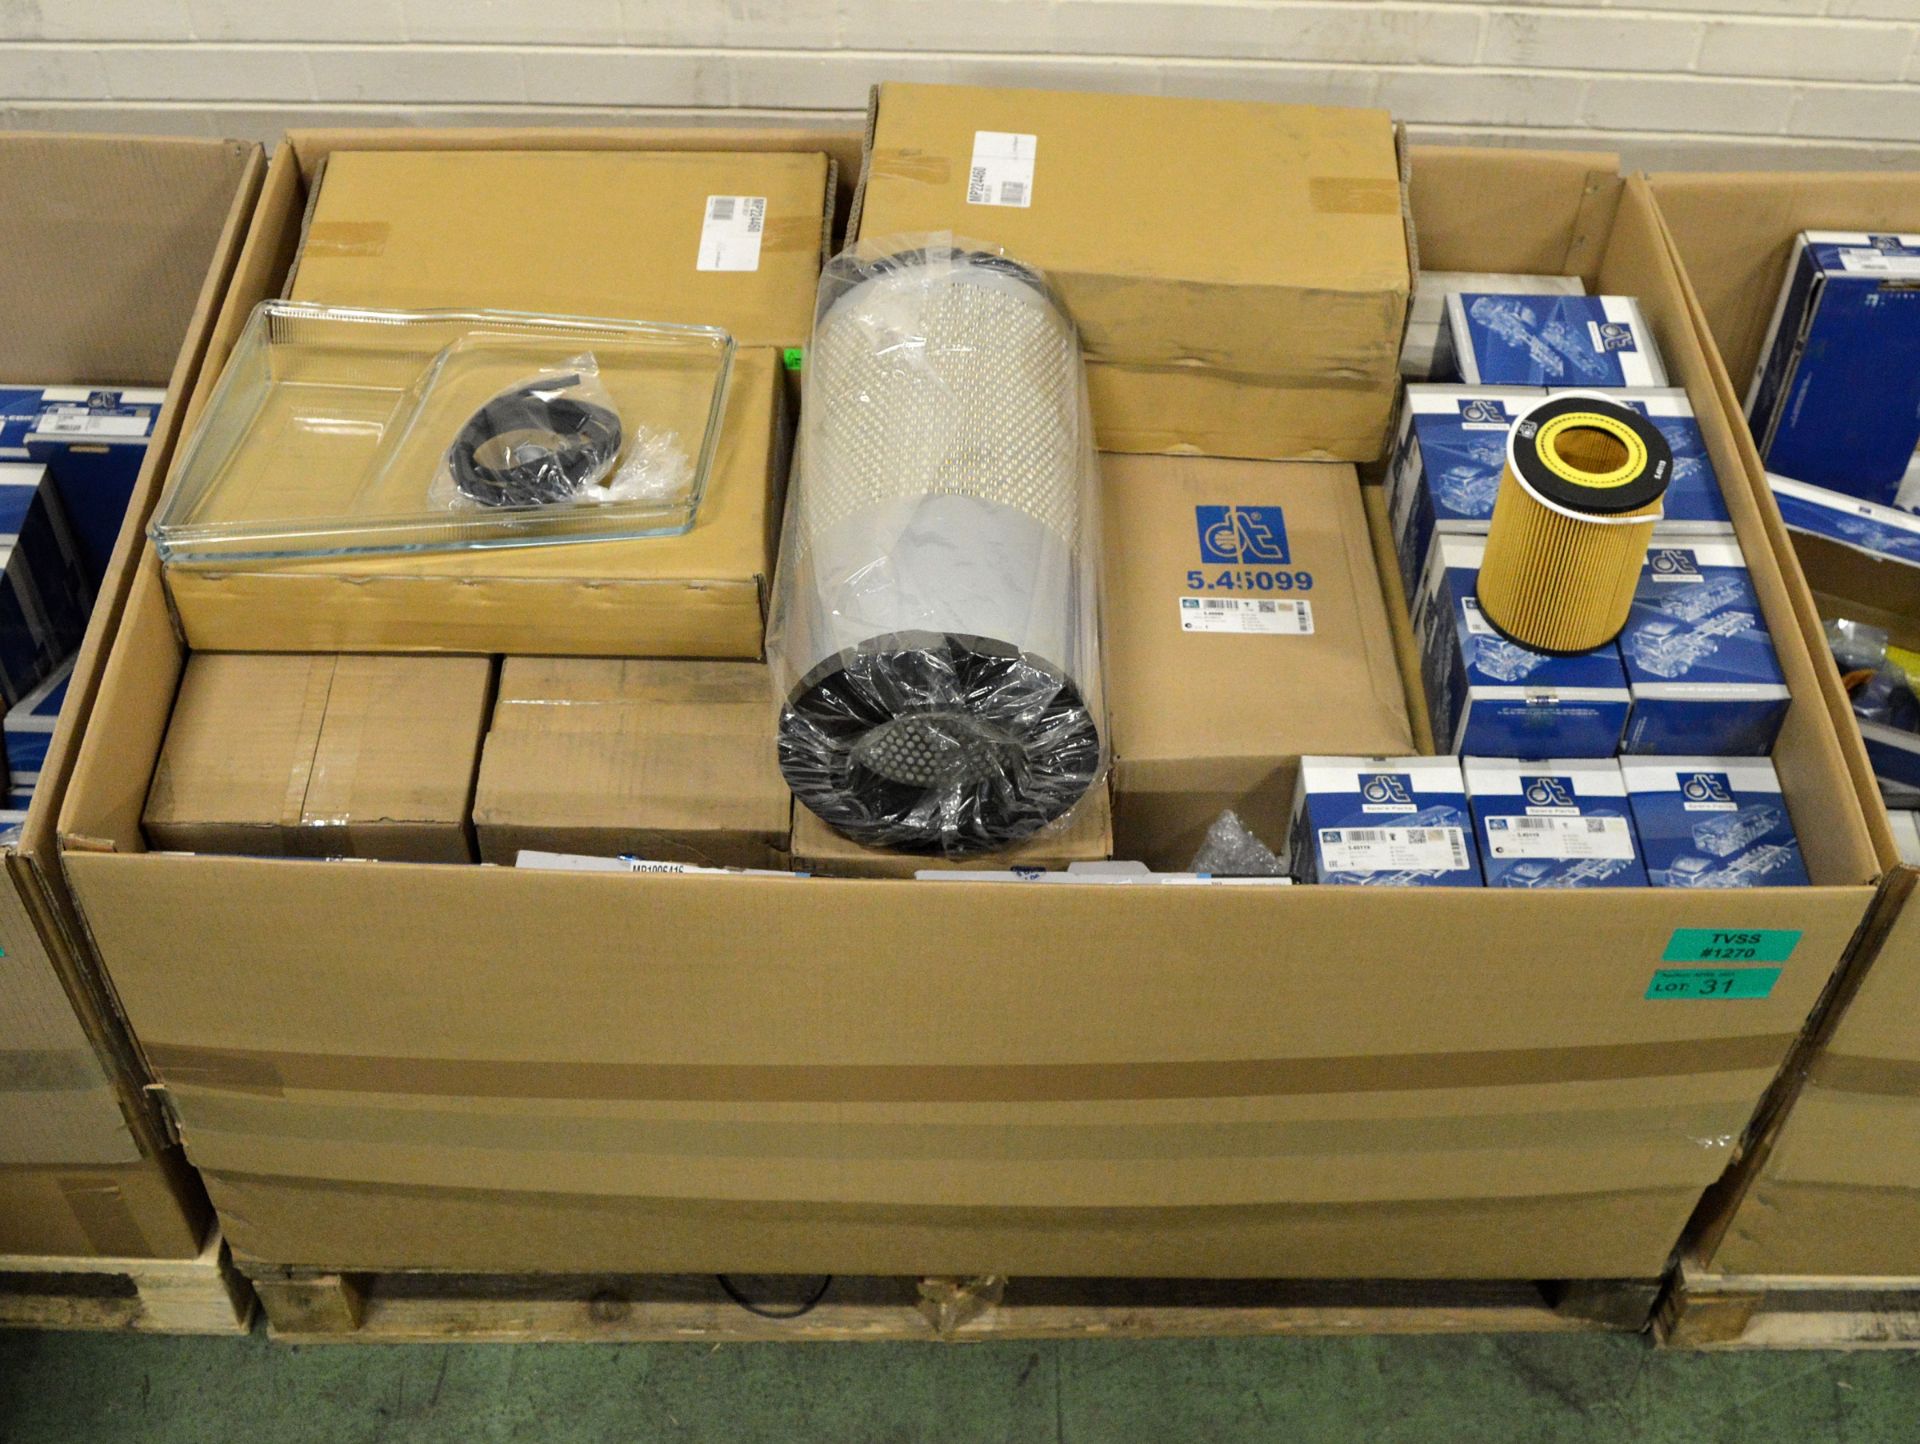 Vehicle parts - brake pad sets, air & oil filters, fuel filter inserts, - see pictures